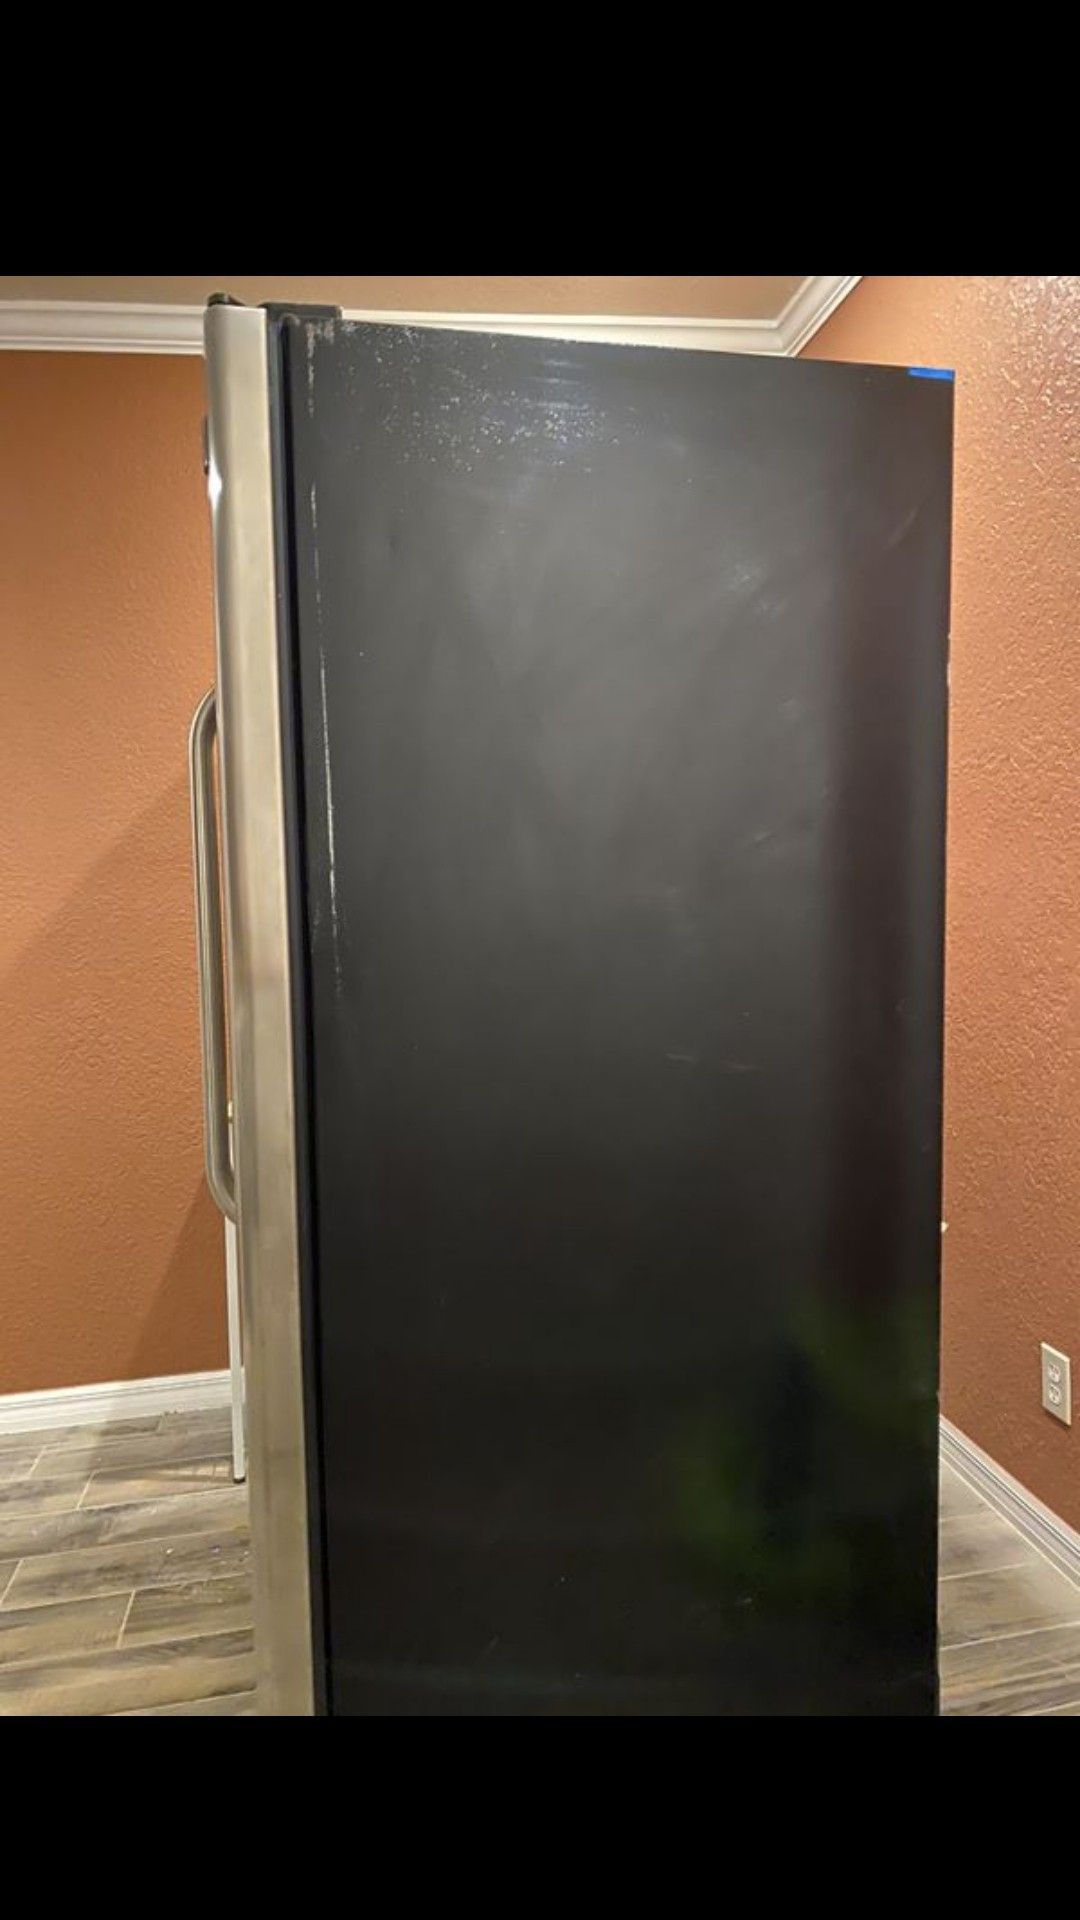 Side by side stainless steel refrigerator/freezer. Looks and works great. Plenty of room inside ! ICE COLD . $399 Don't Ask for my number